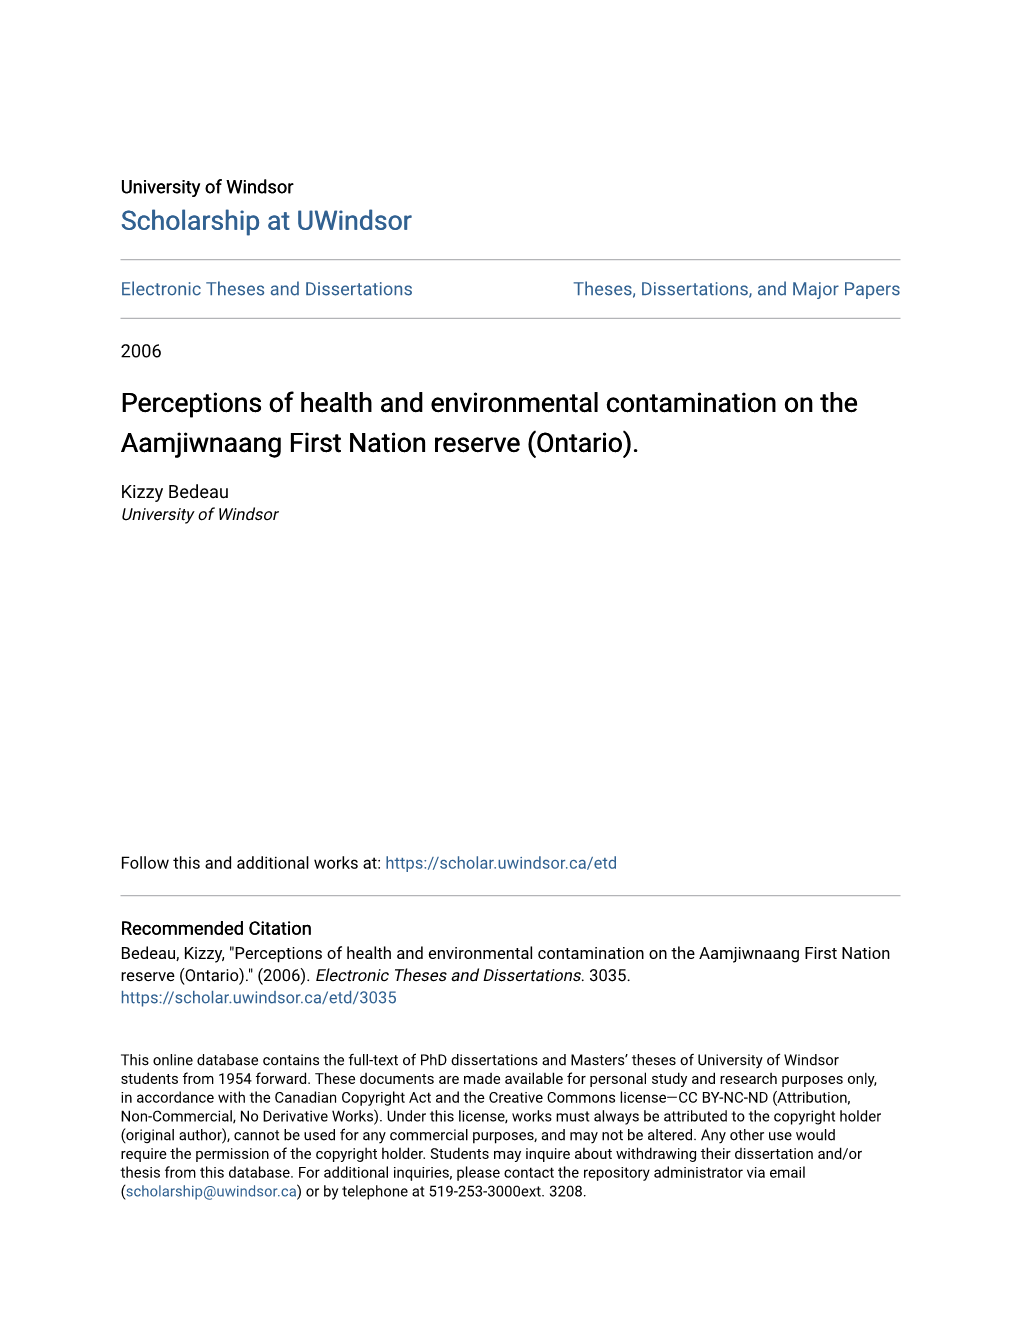 Perceptions of Health and Environmental Contamination on the Aamjiwnaang First Nation Reserve (Ontario)